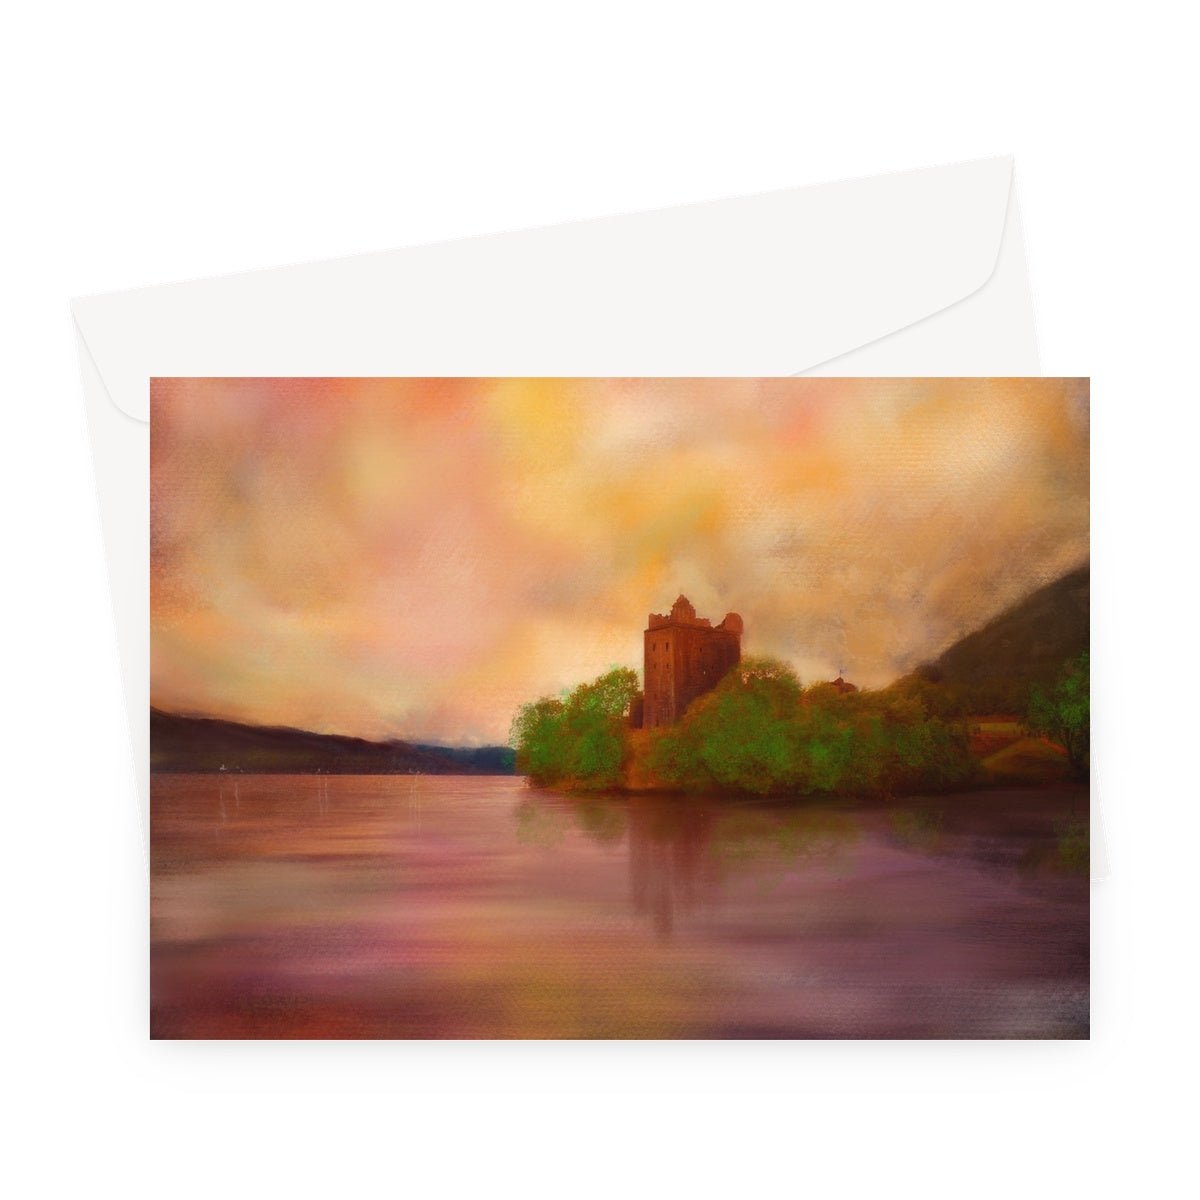 Urquhart Castle Art Gifts Greeting Card-Greetings Cards-Scottish Castles Art Gallery-A5 Landscape-10 Cards-Paintings, Prints, Homeware, Art Gifts From Scotland By Scottish Artist Kevin Hunter